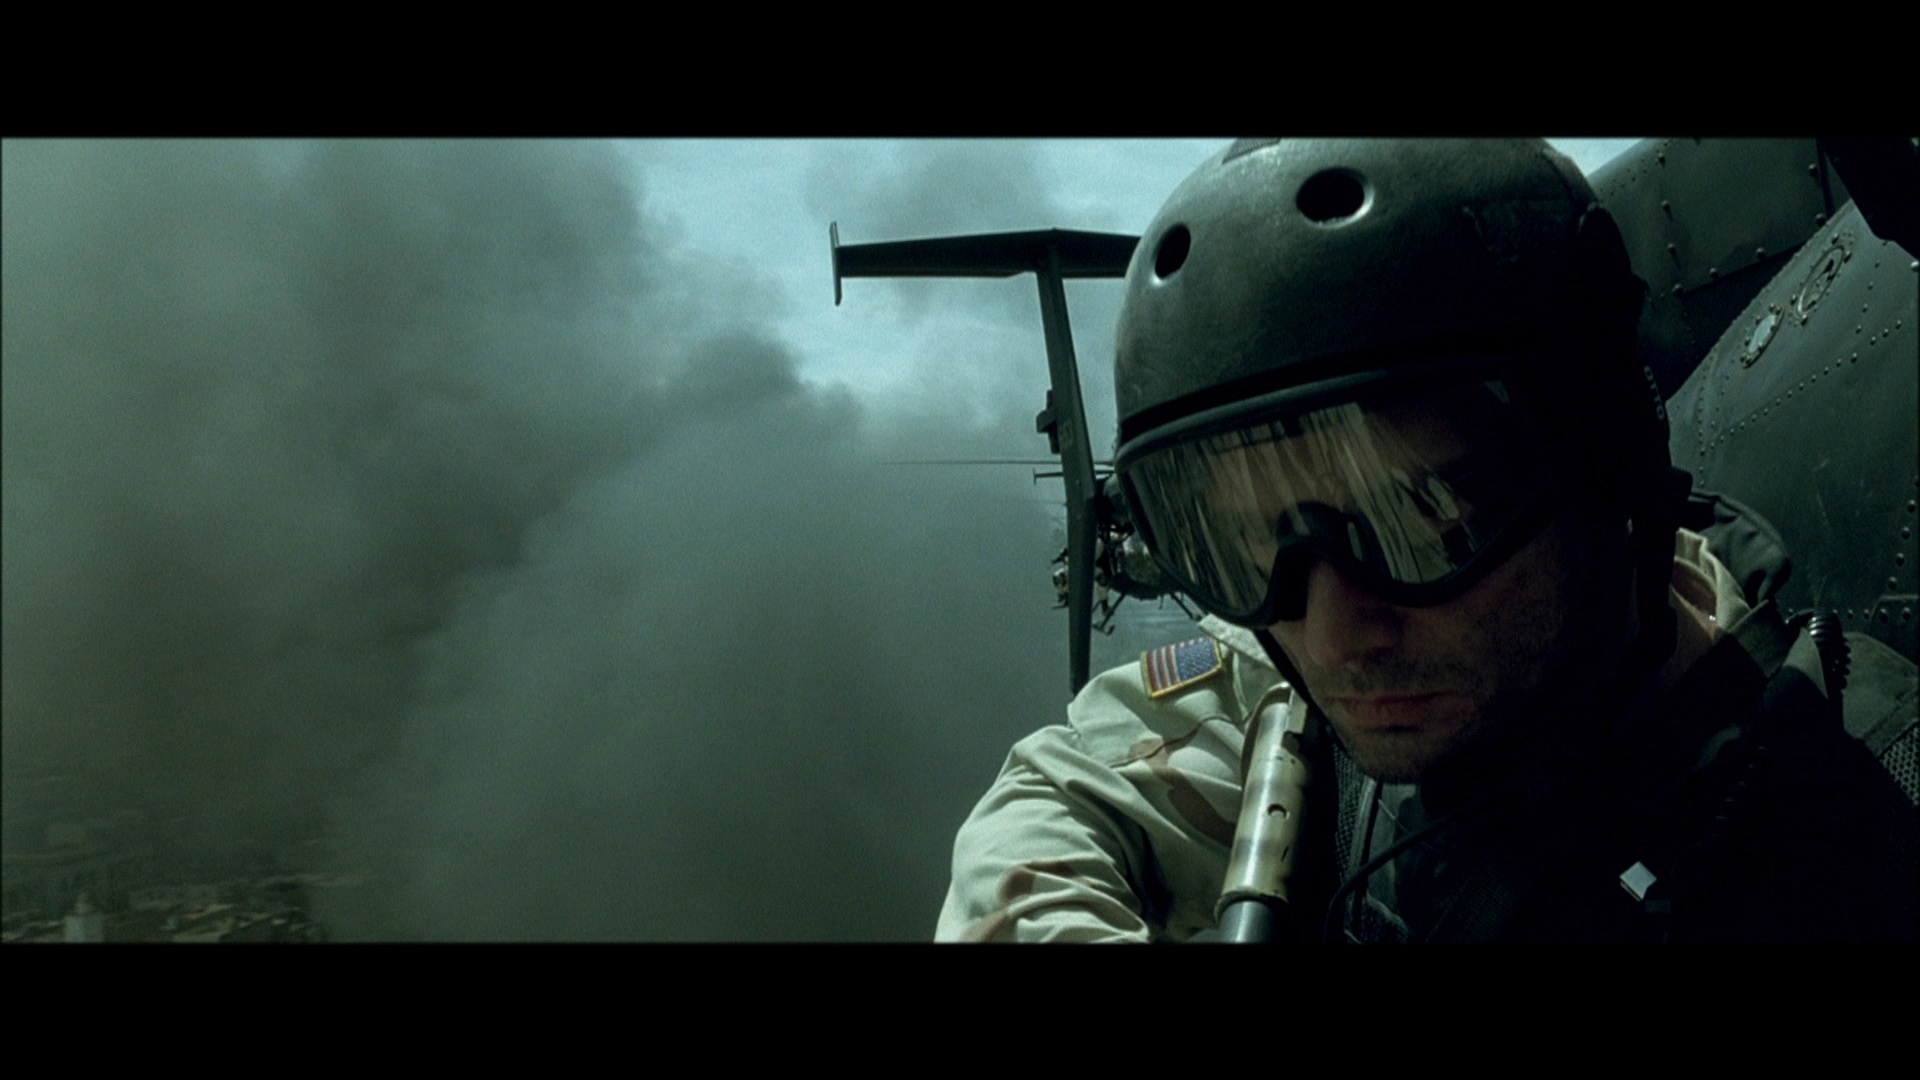 black hawk down, Drama, History, War, Action, Black, Hawk, Down, Military, Soldier, Helicopter Wallpaper